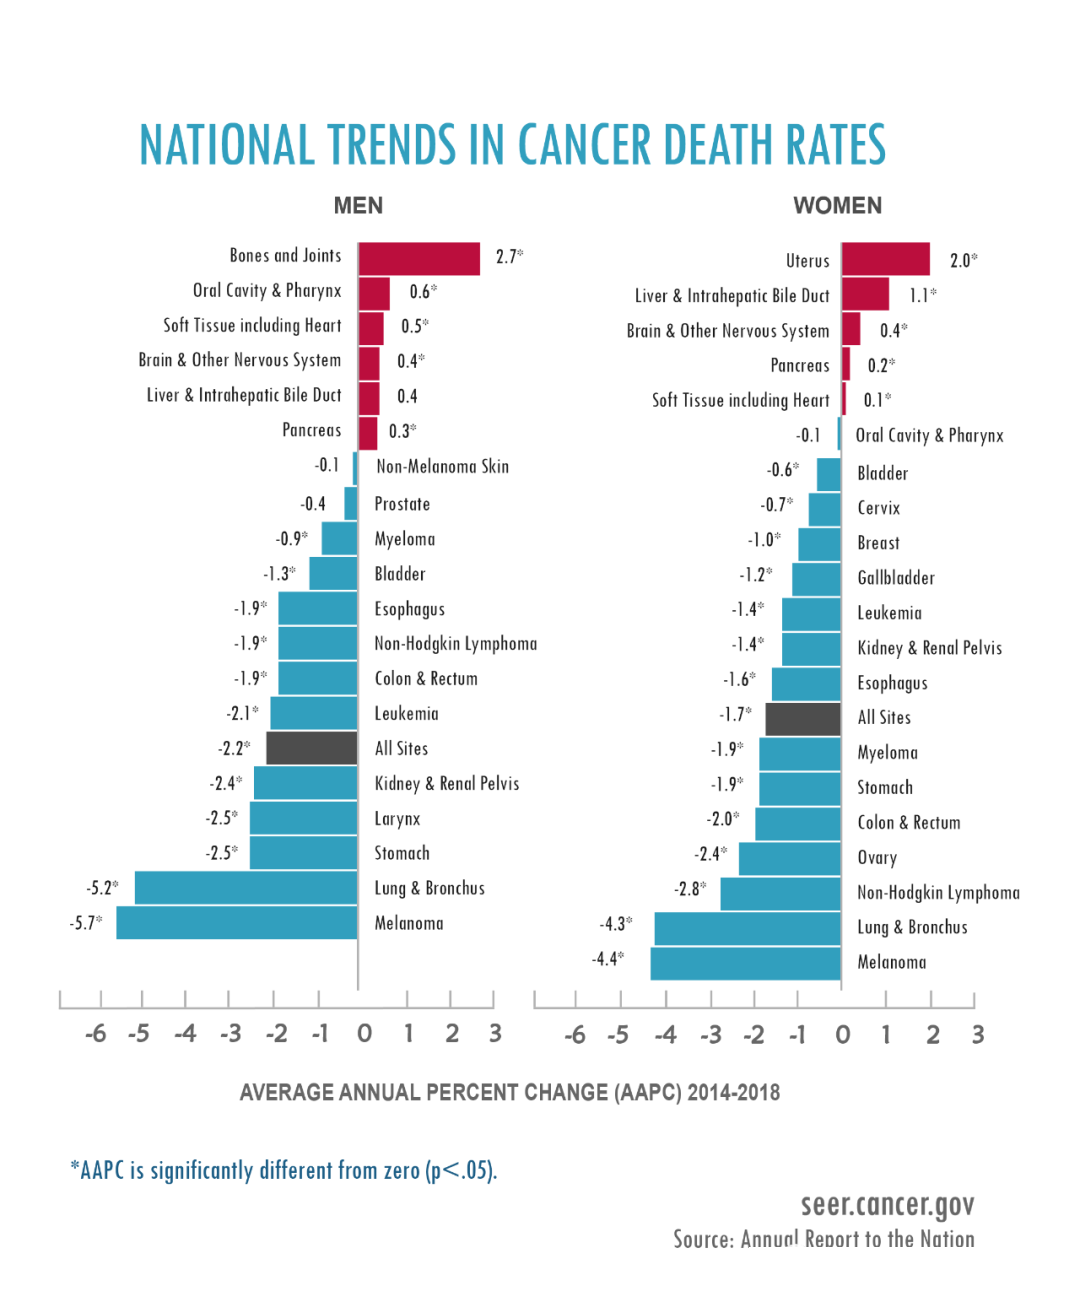 in the united states the 5-year survival rate for cancer overall is currently